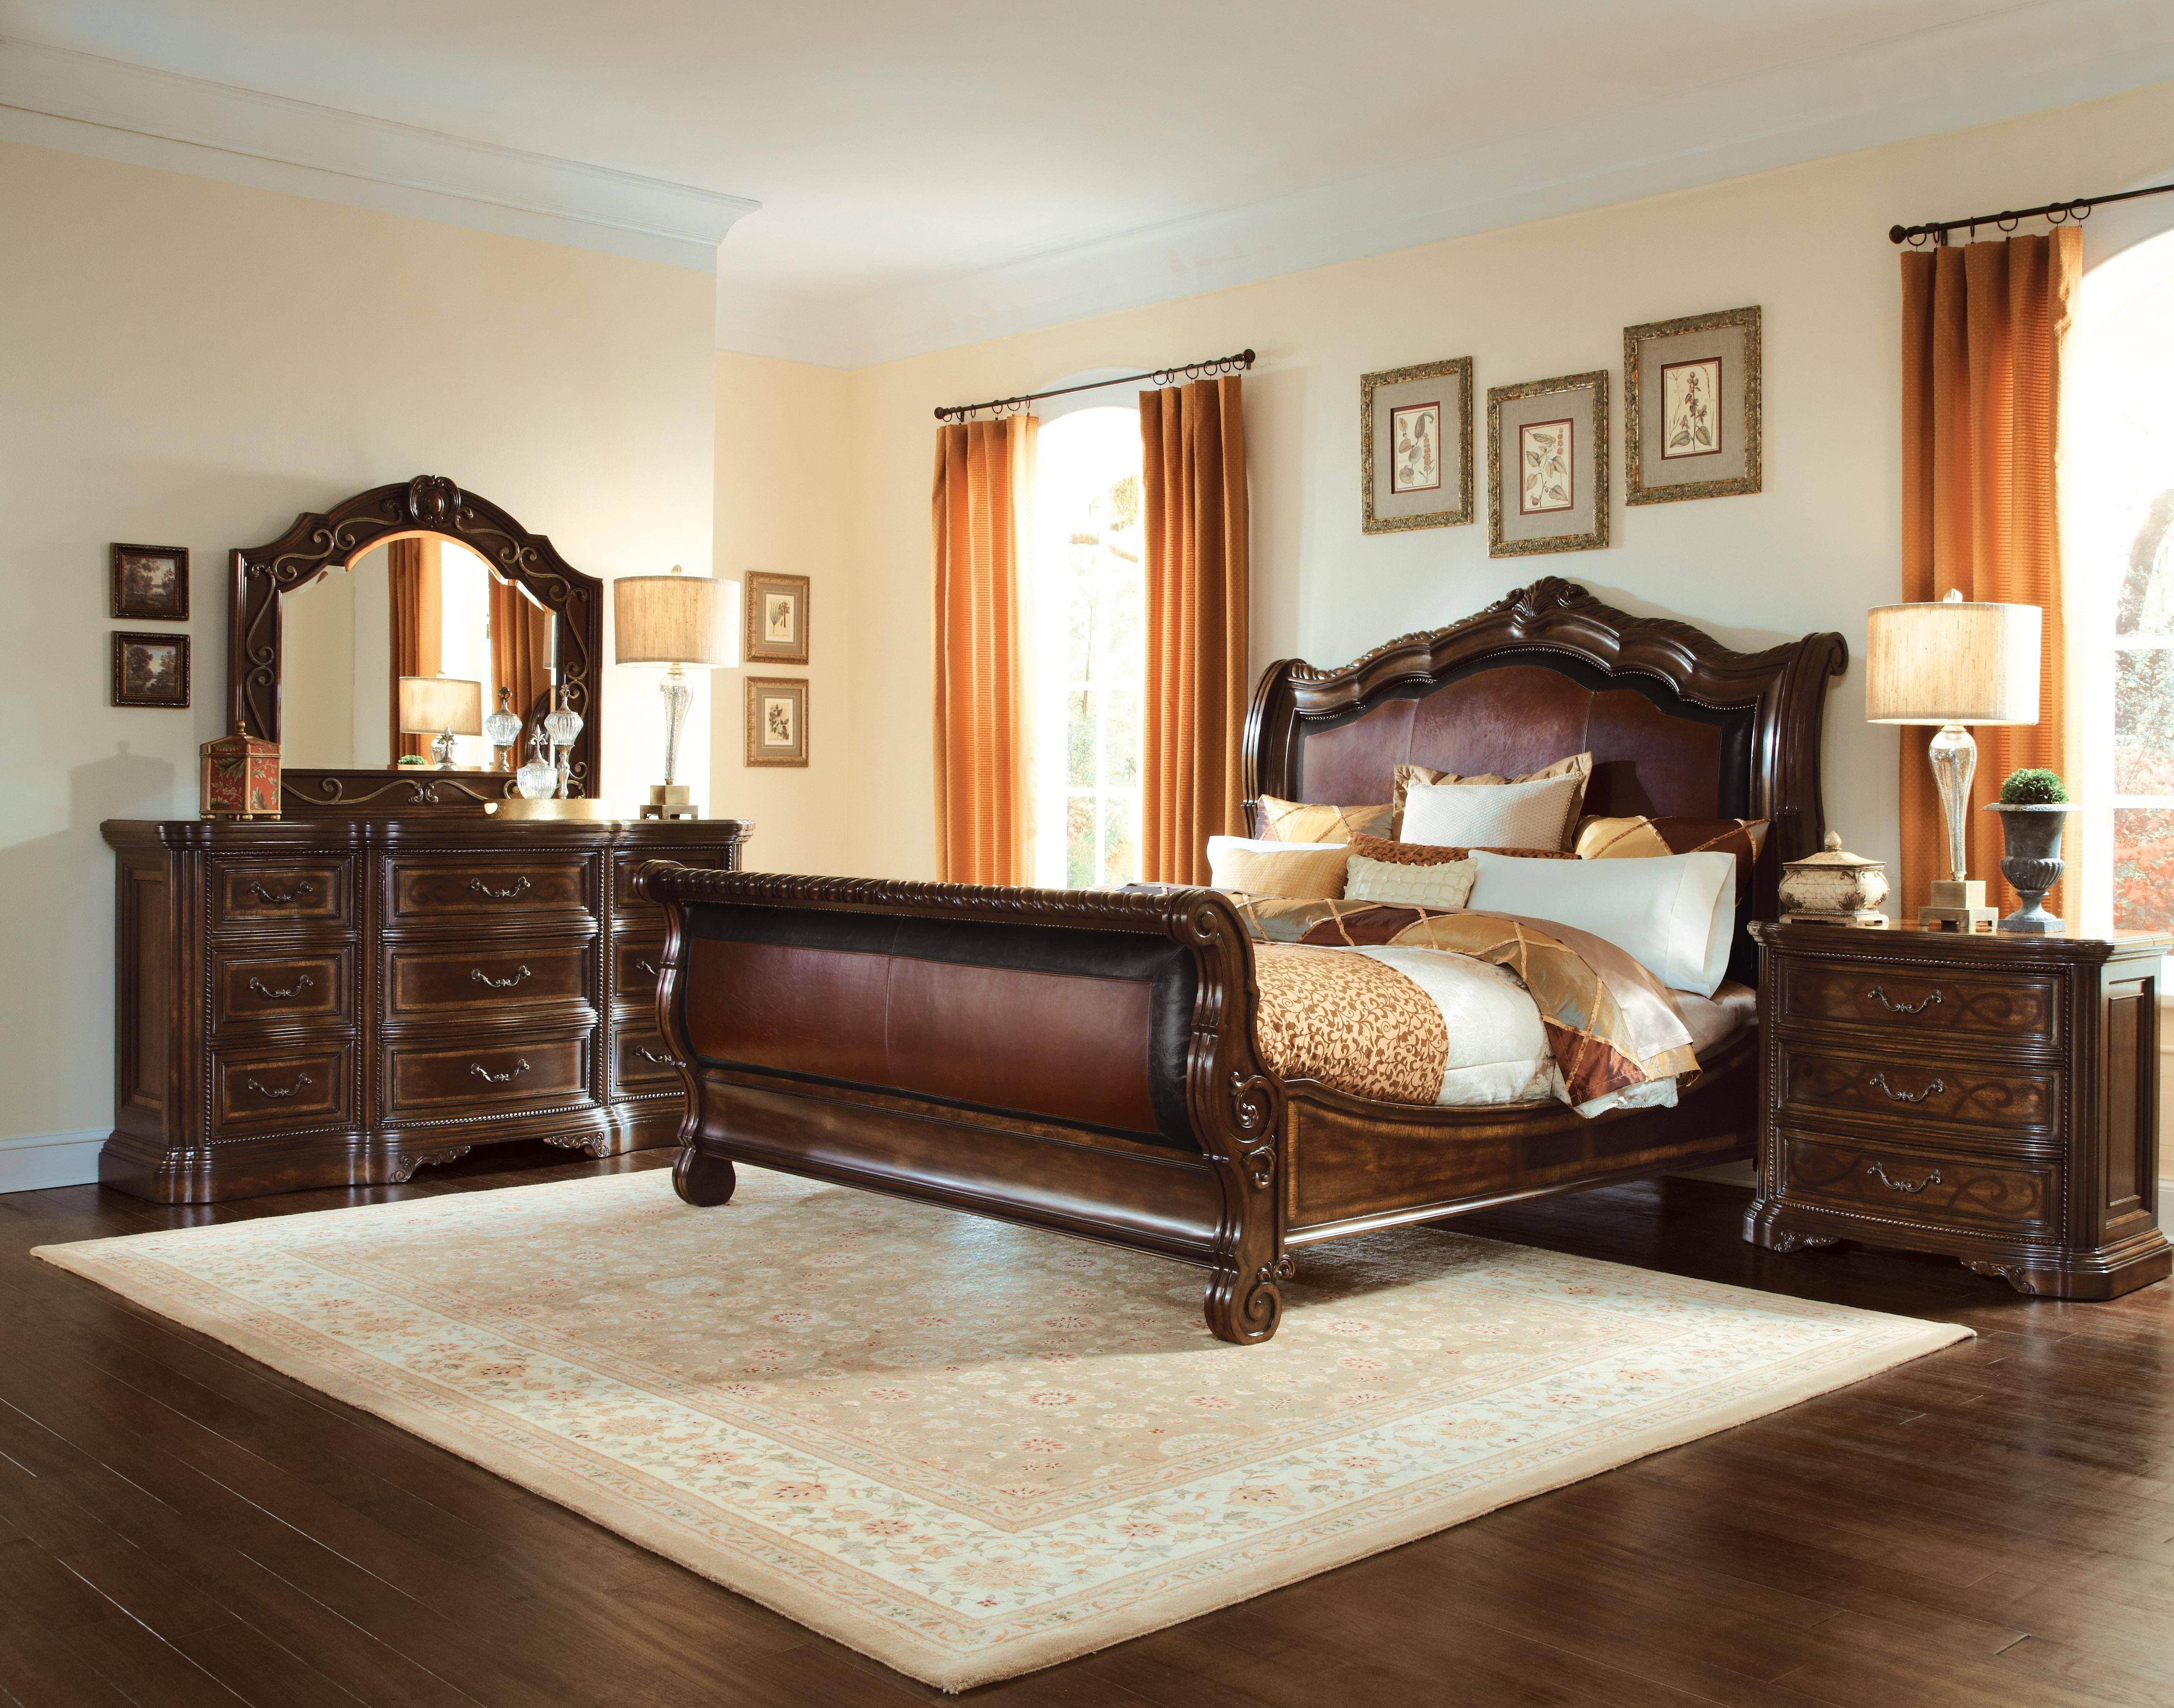 King Size Oak Bedroom Set Inspirational Traditional Dark Oak Faux Leather King Sleigh Bed Valencia A R T